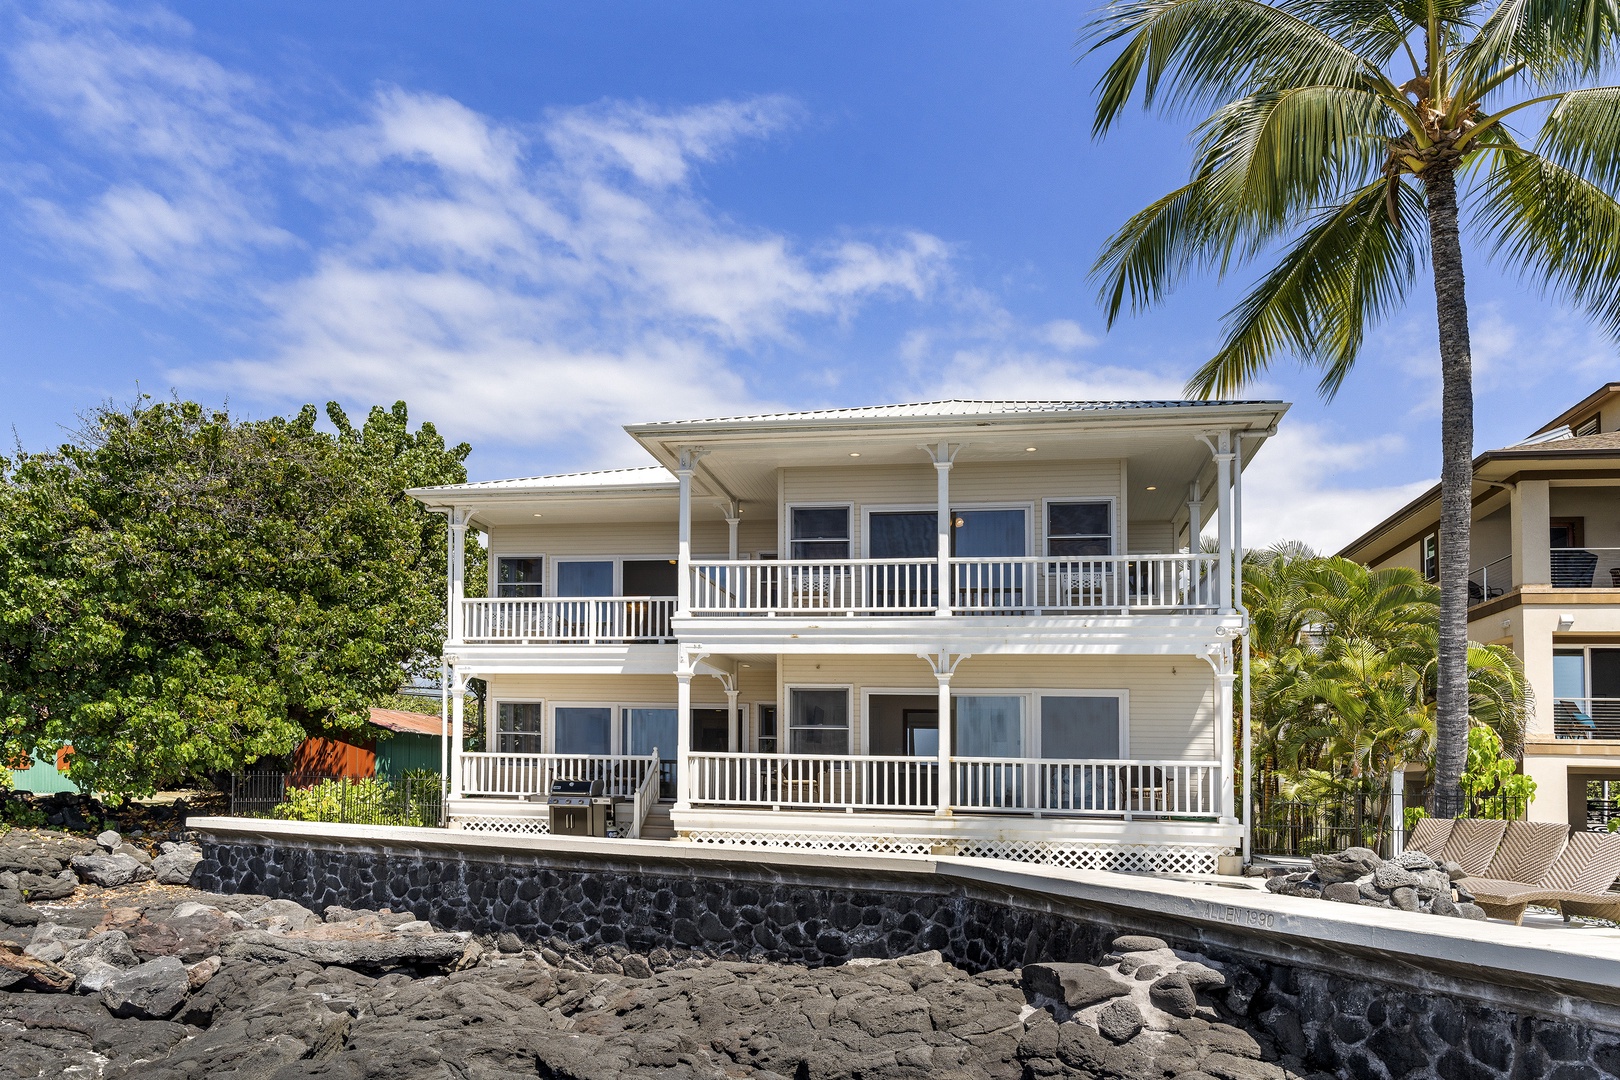 Kailua Kona Vacation Rentals, Dolphin Manor - From the ocean facing the home you can see the wraparound Lanai